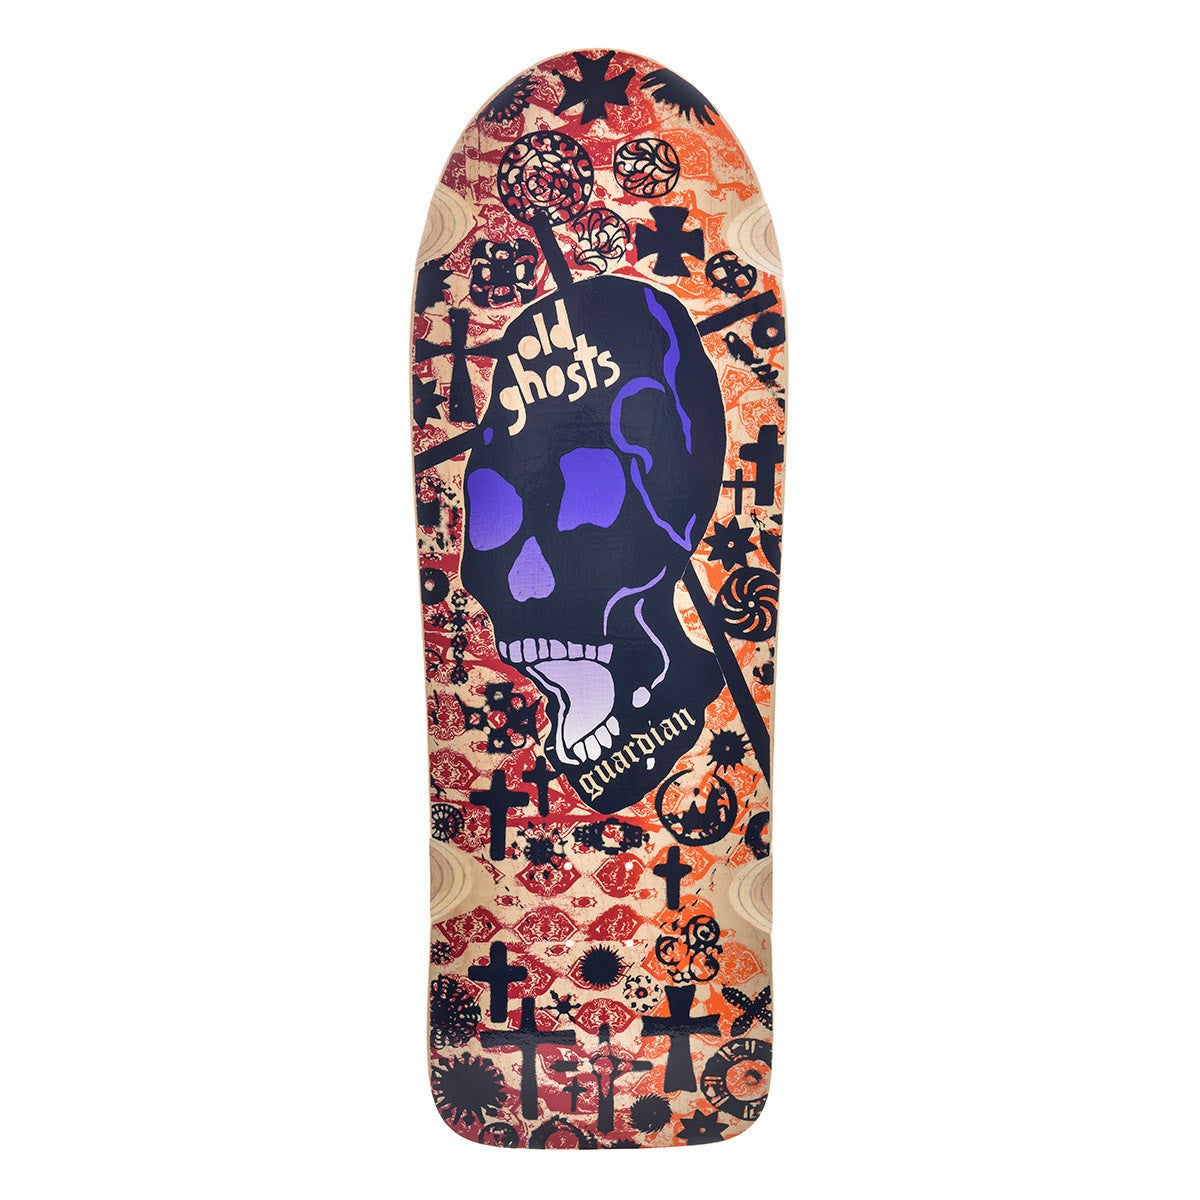 VISION DECK - OLD GHOST NATURAL (10")